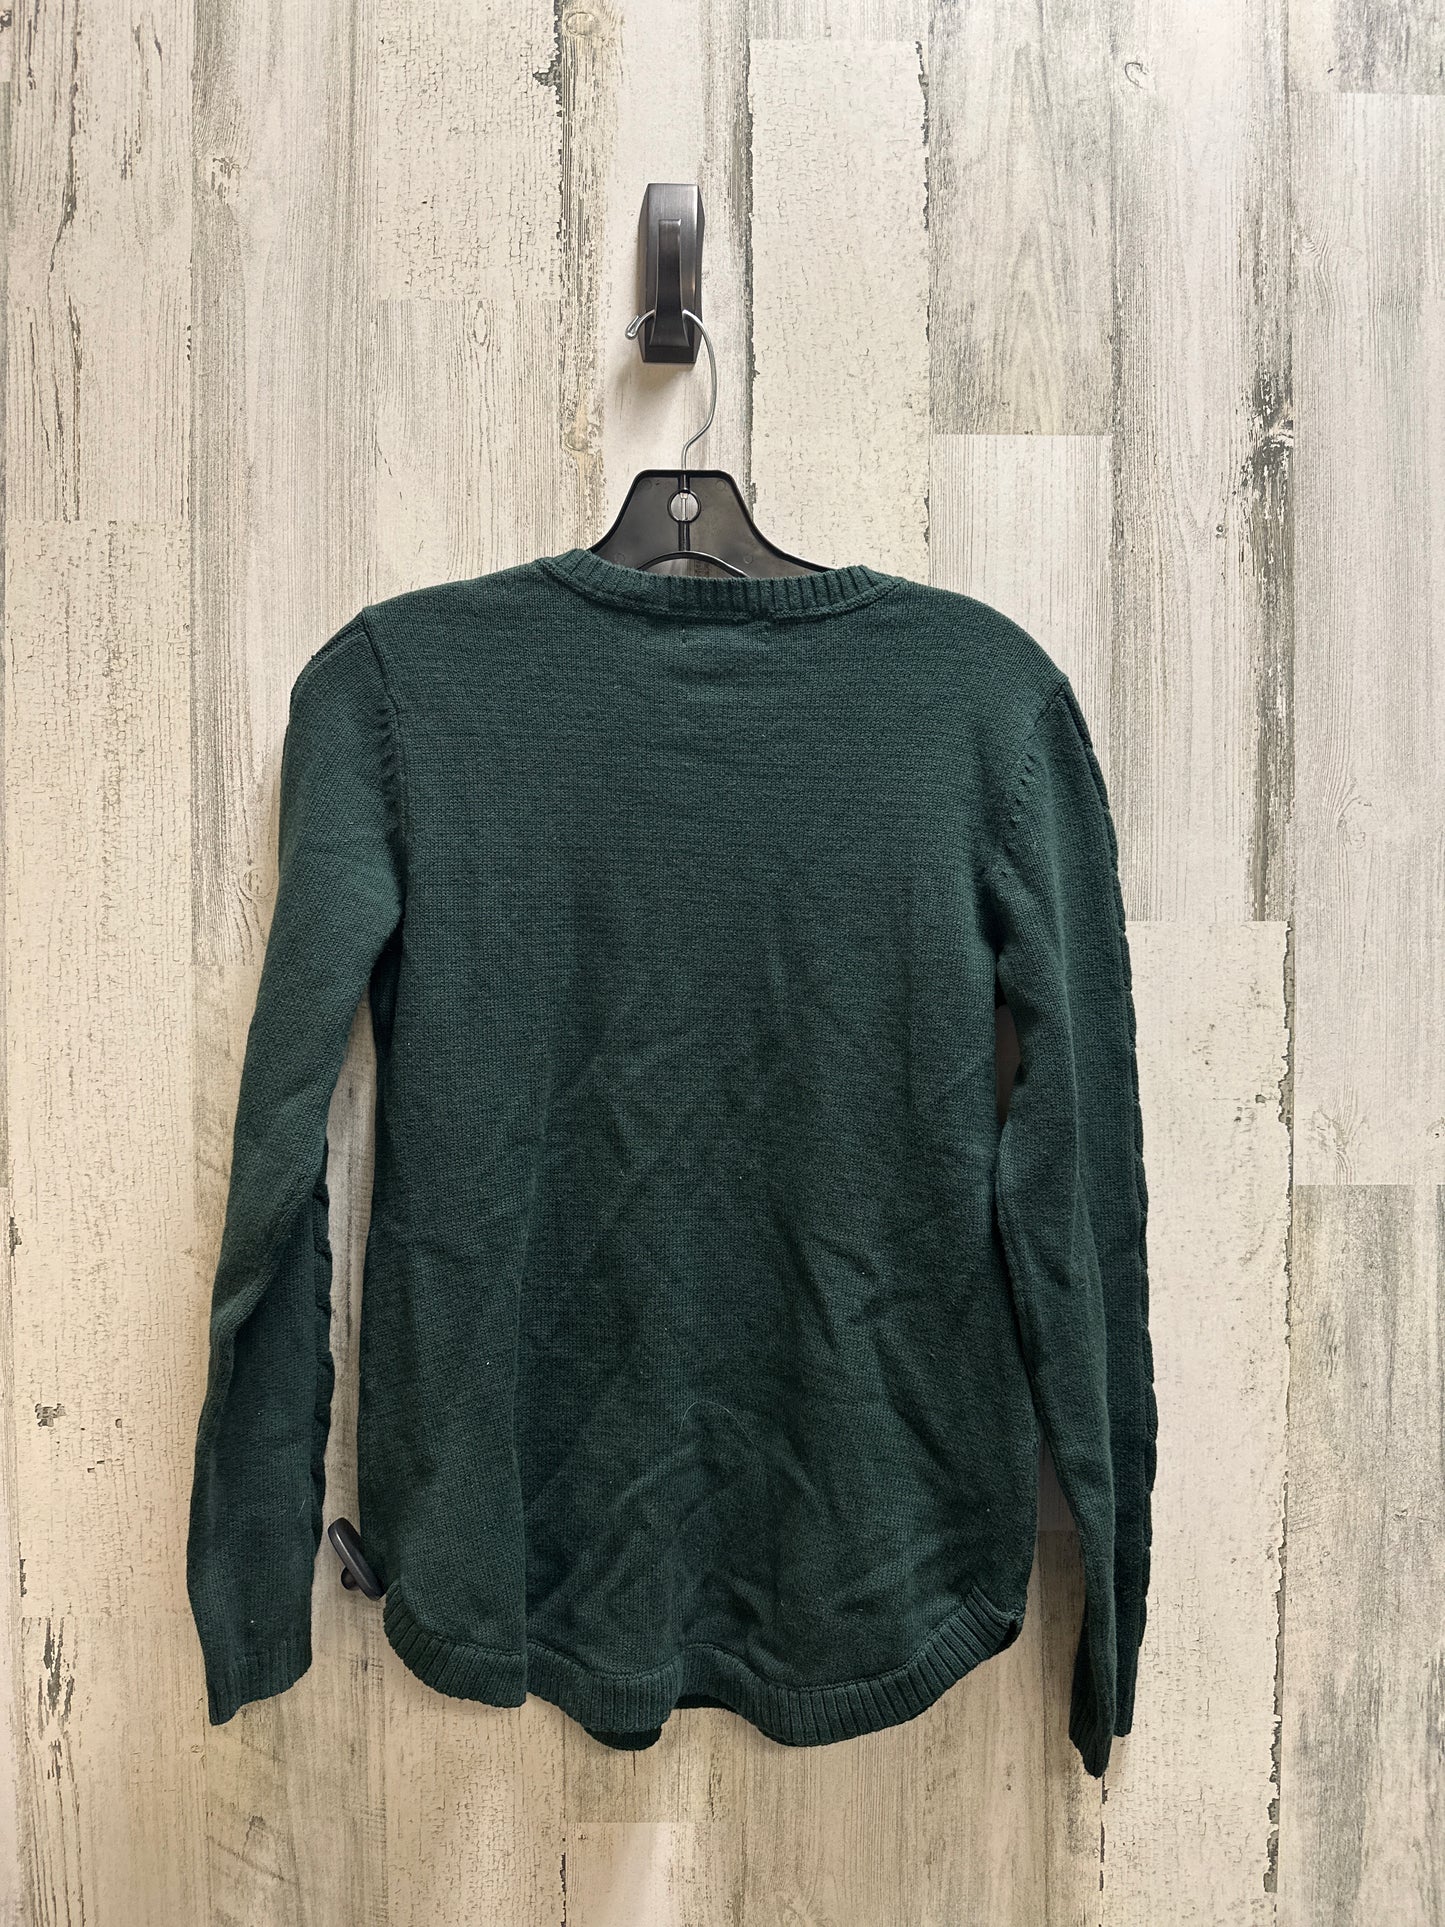 Sweater By Charter Club  Size: S